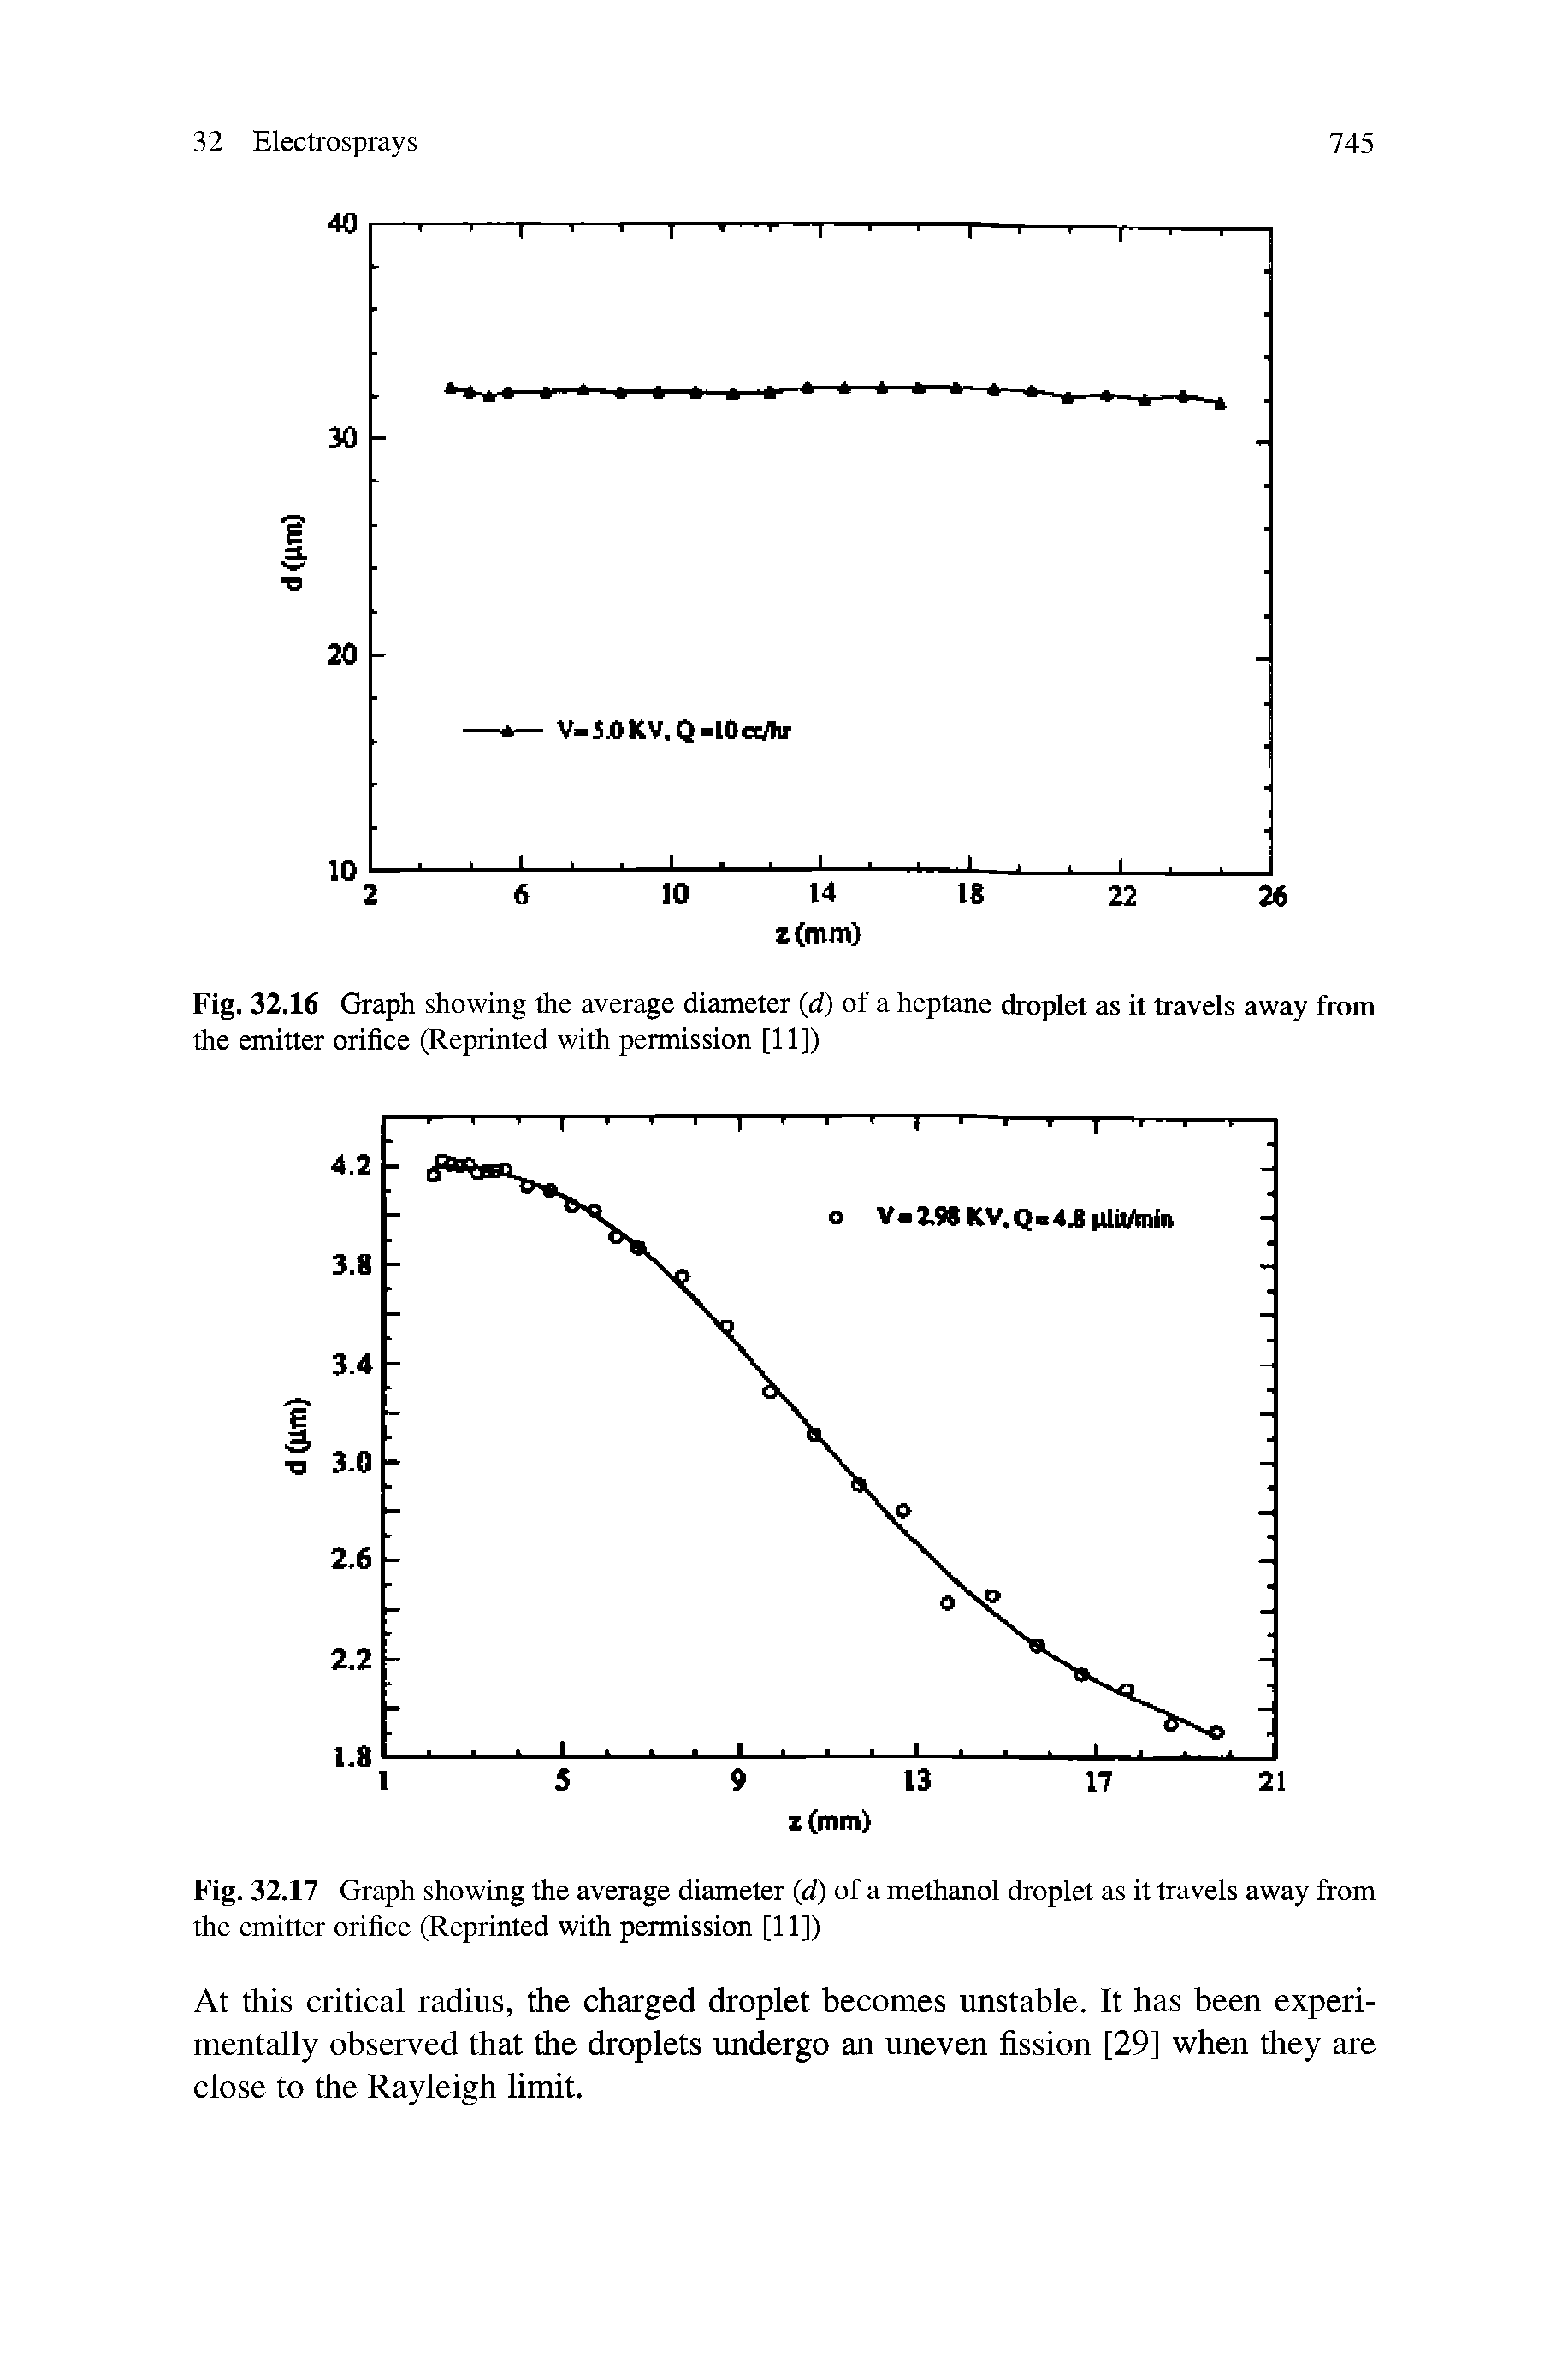 Fig. 32.16 Graph showing the average diameter (d) of a heptane droplet as it travels away ftom the emitter orifice (Reprinted with permission [11])...